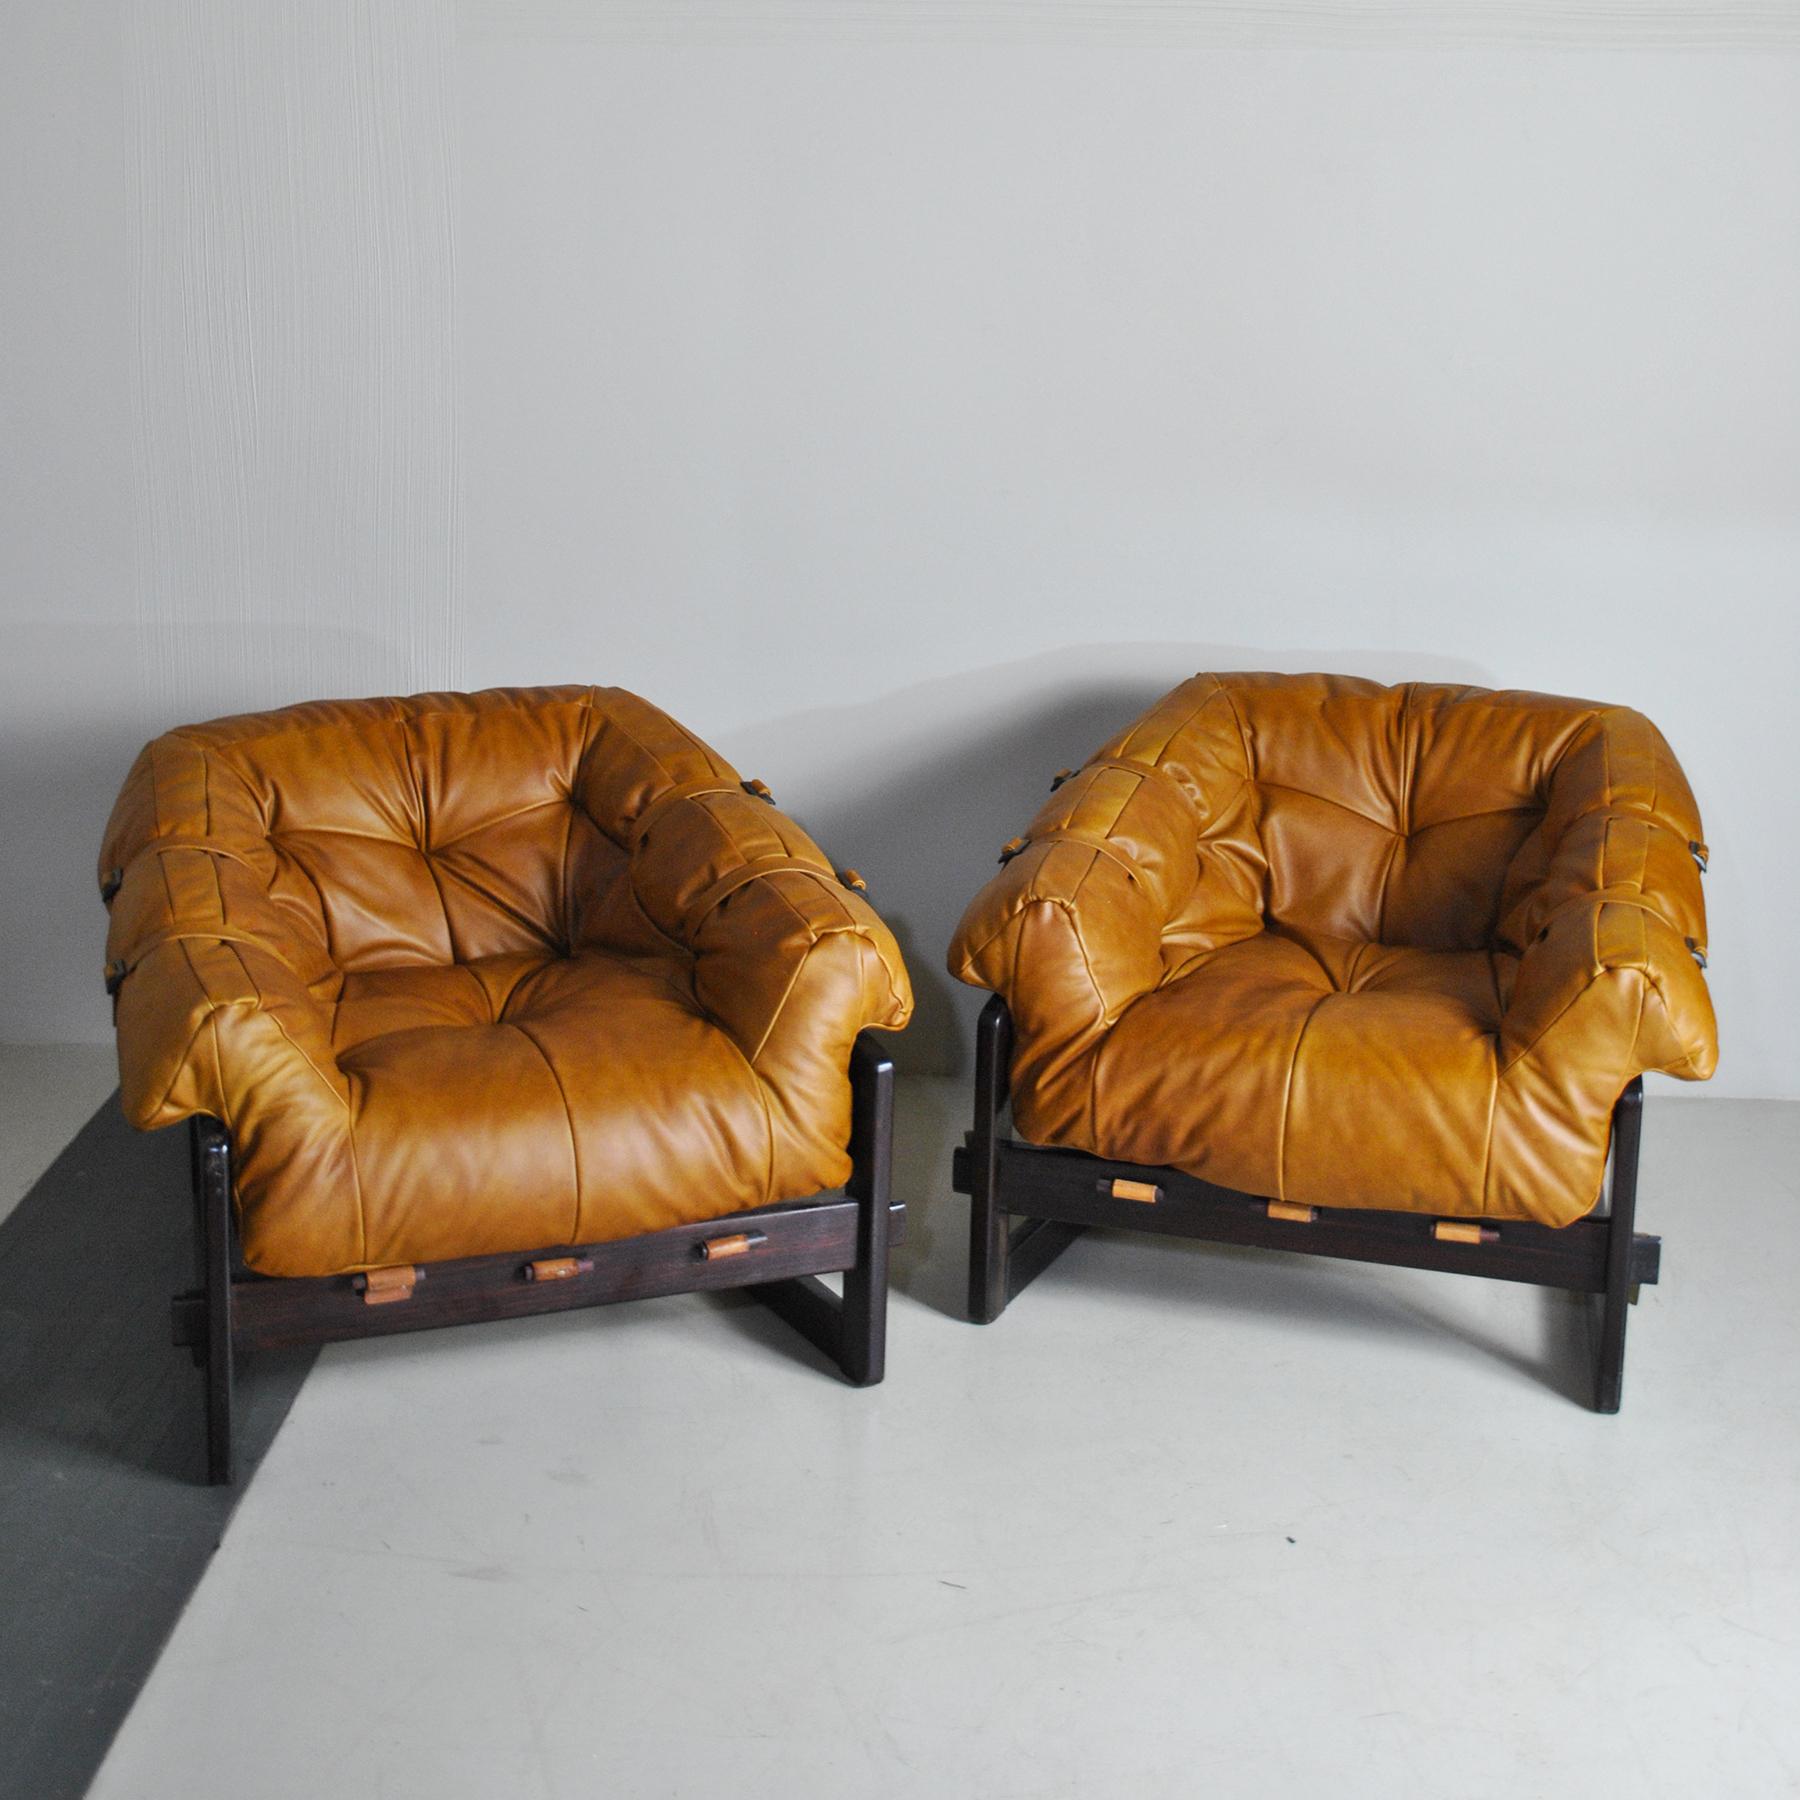 Leather Percival Lafer Pair of Midcentury Brazilian Lounge Chair, 1960s